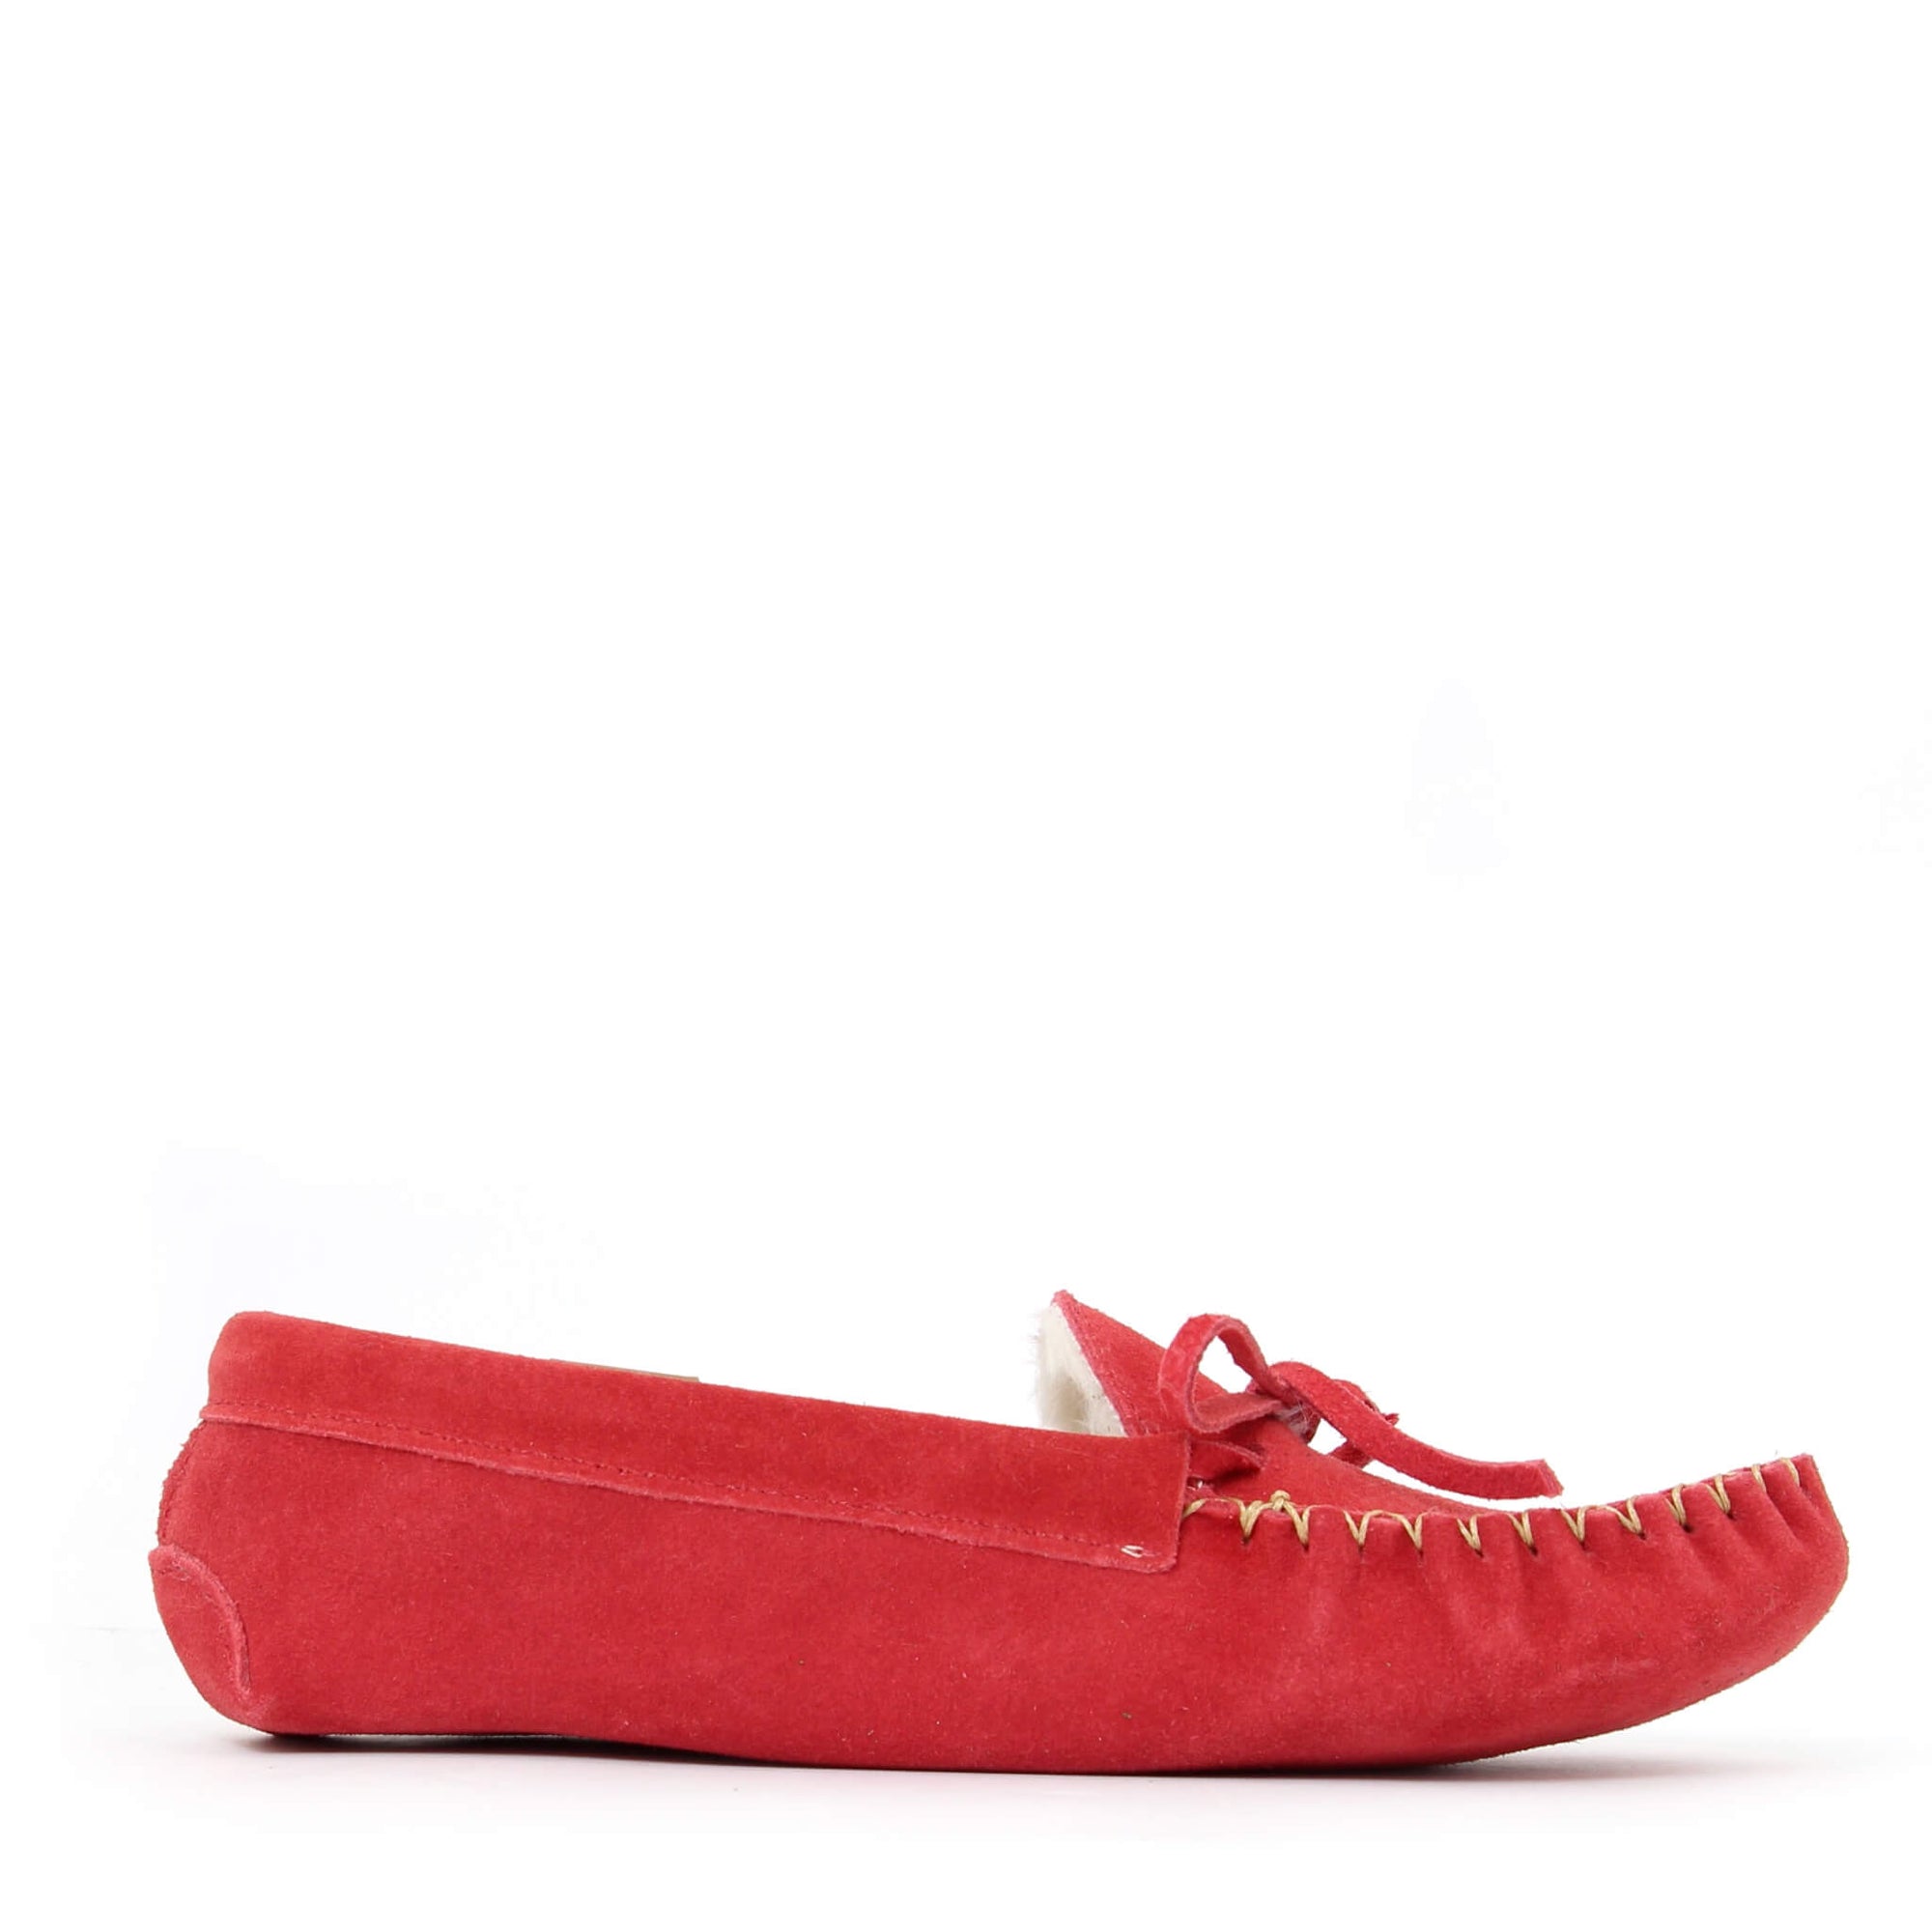 Istah Moccasin for Women - Red 